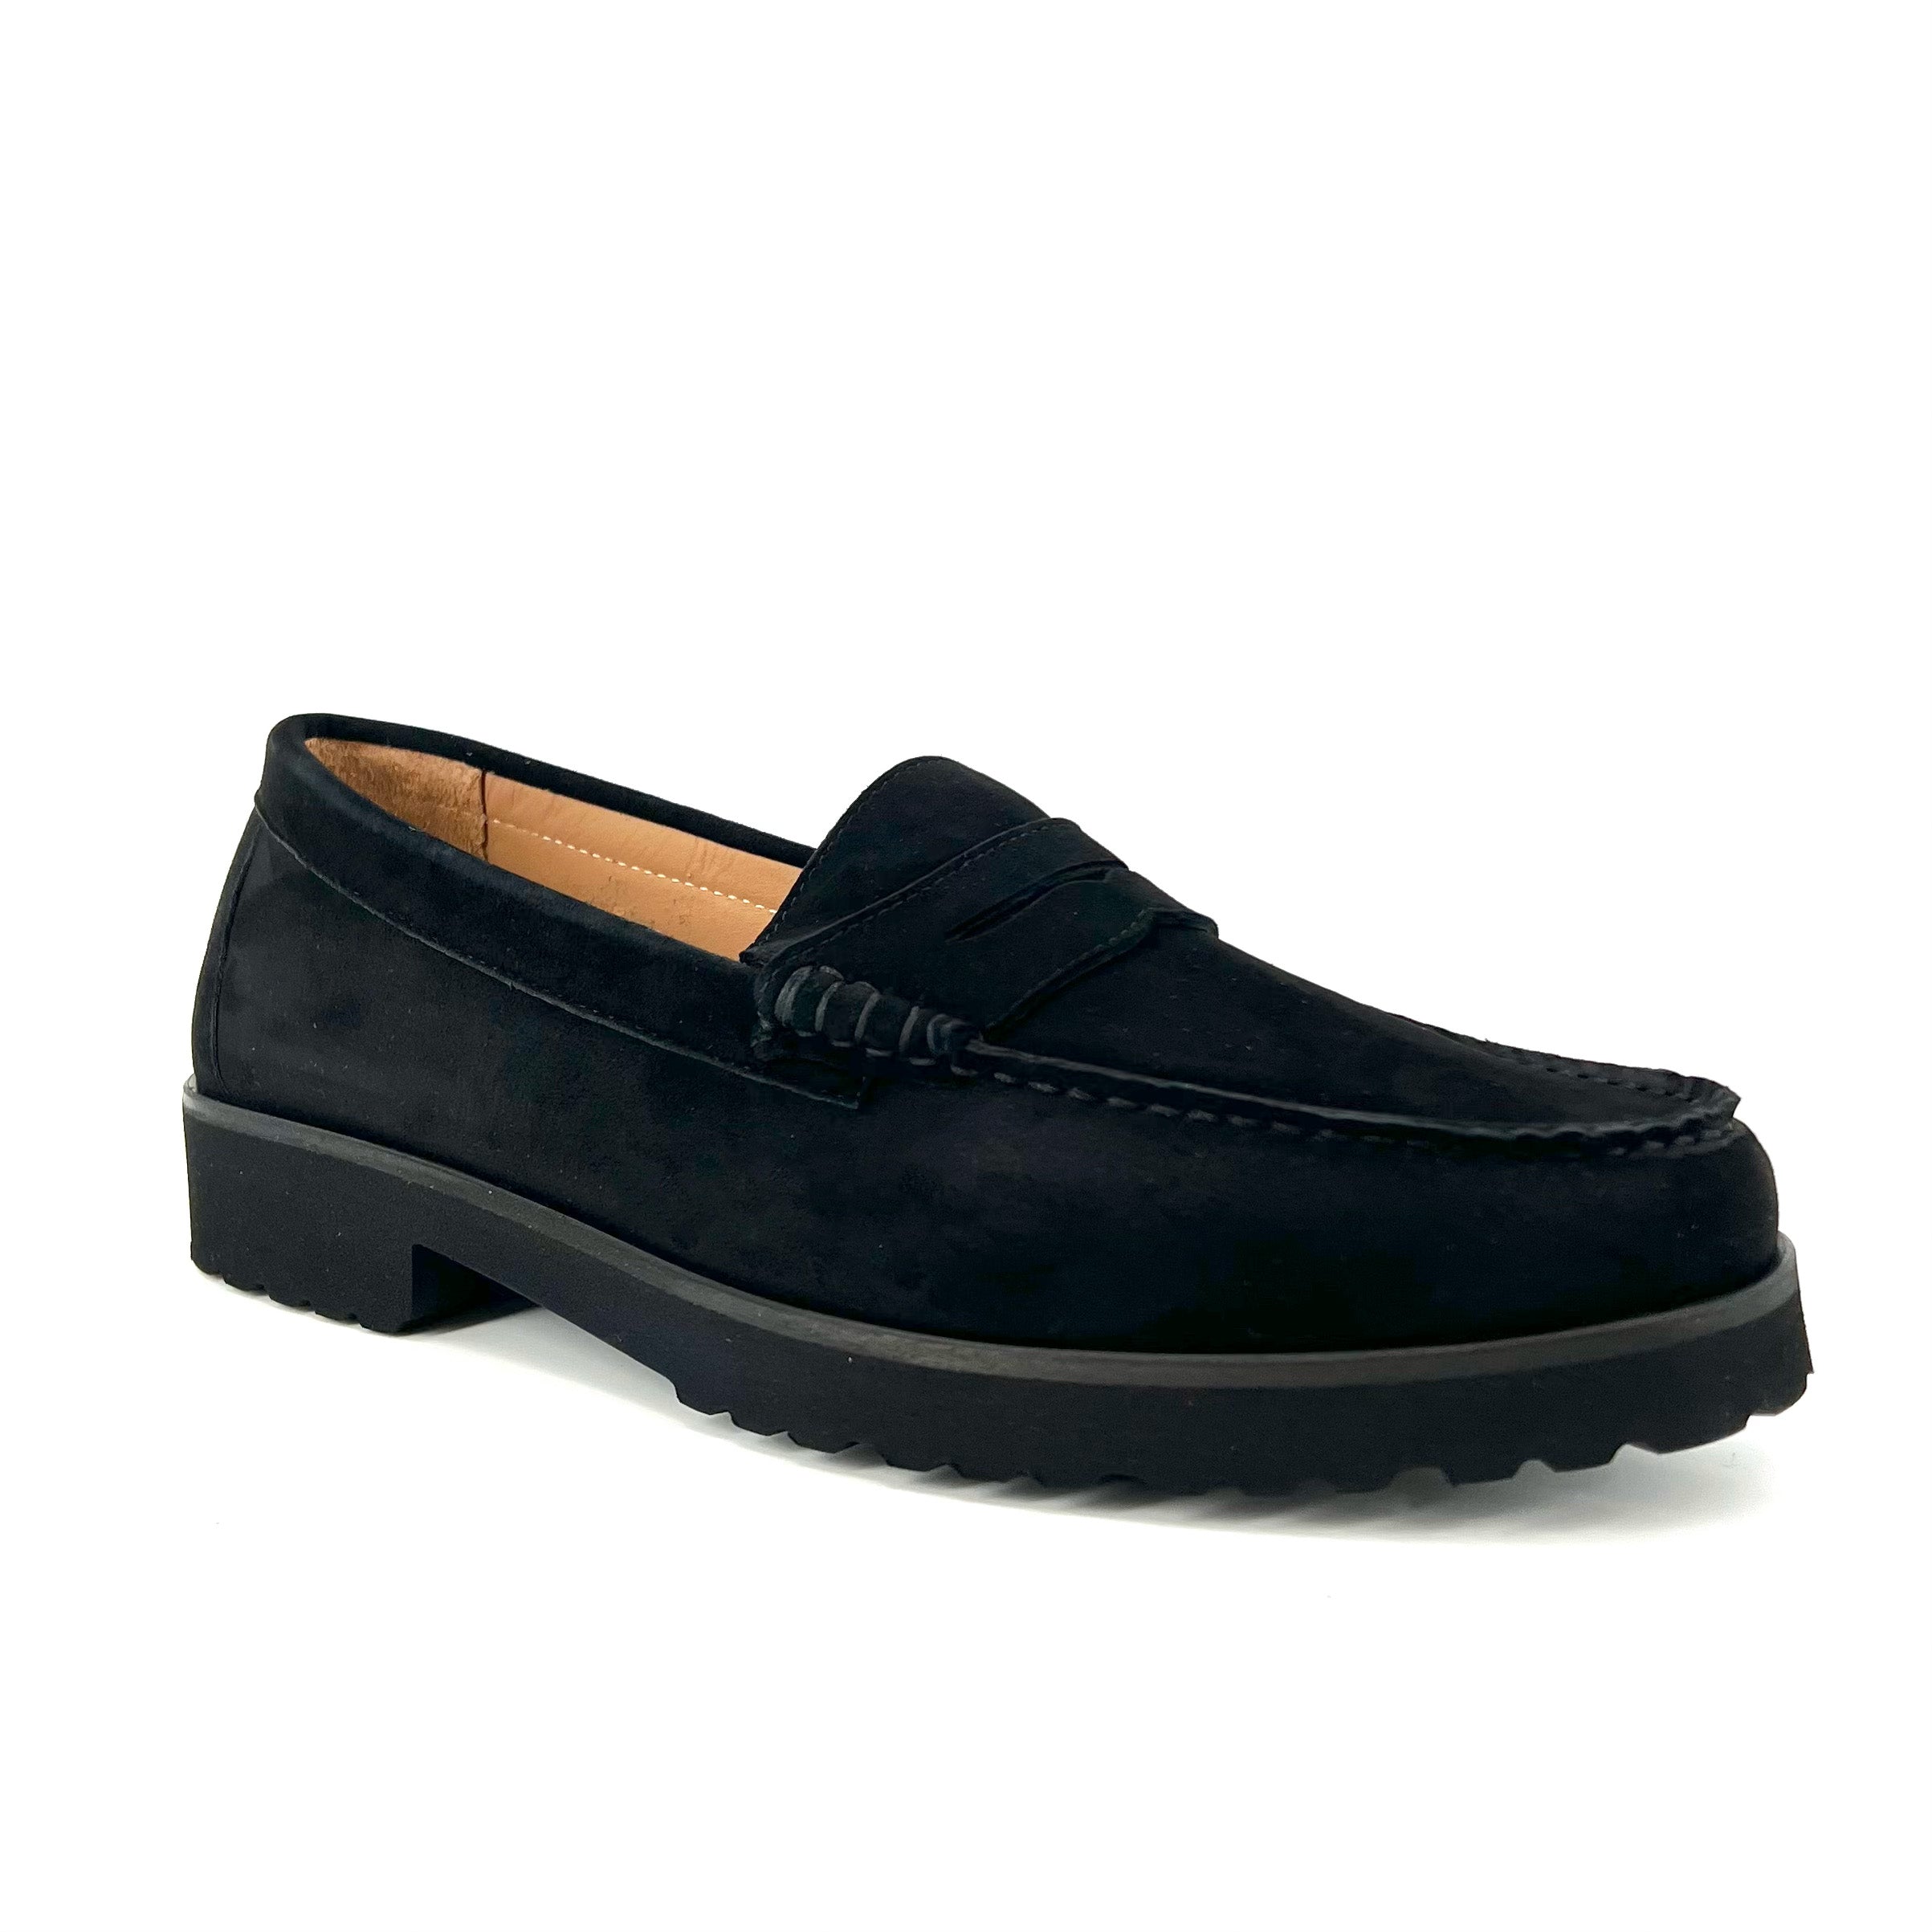 The Classic Lug Loafer in Black